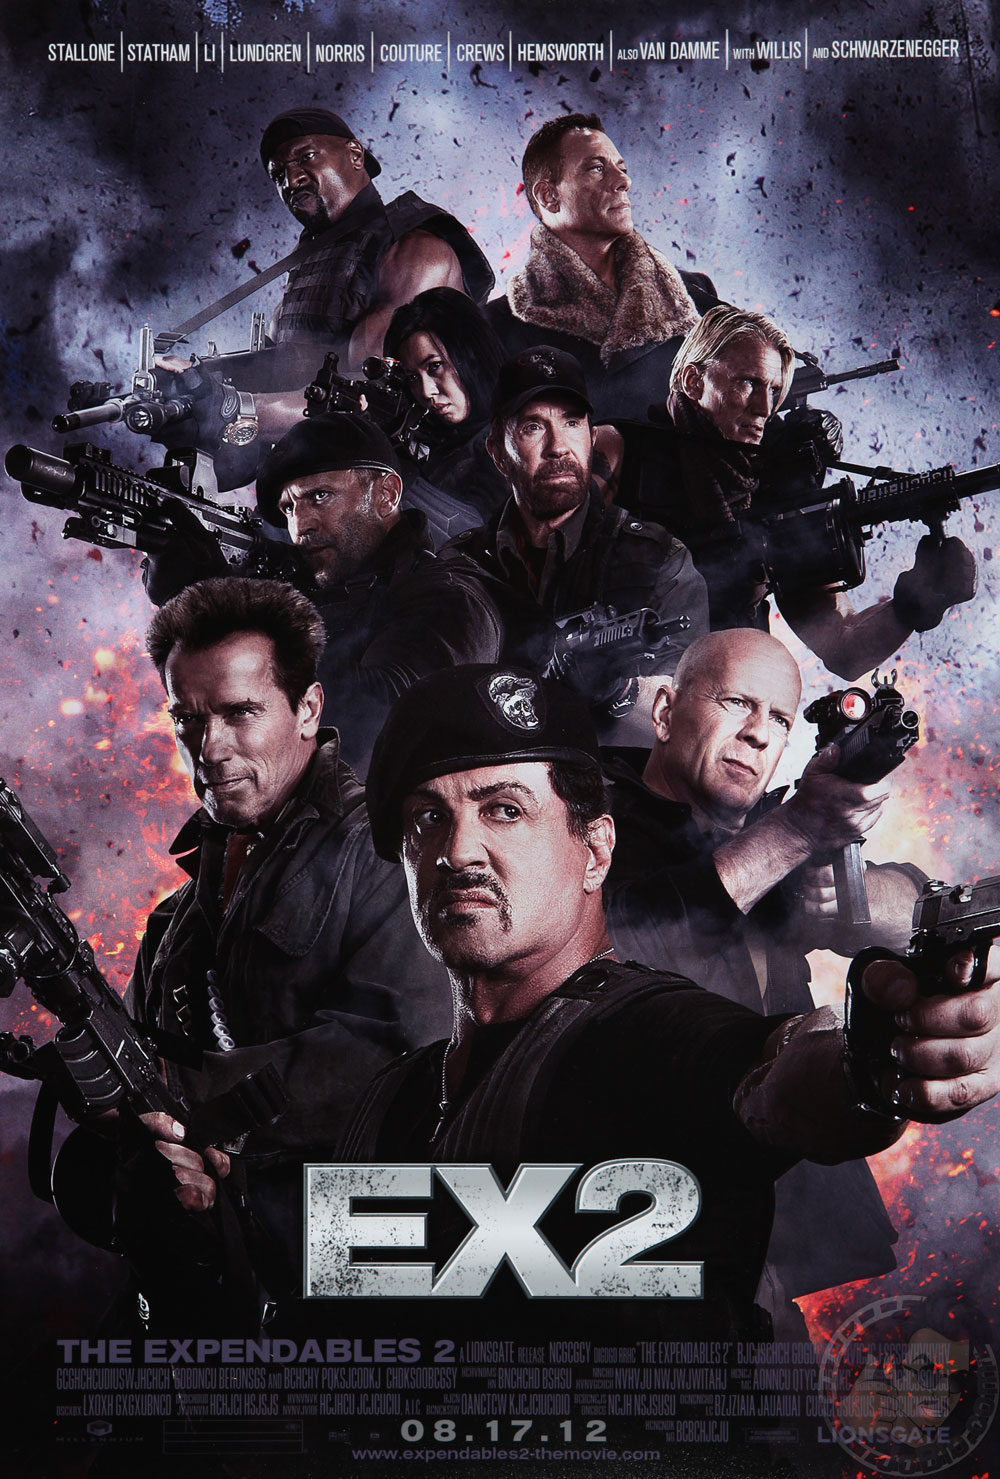 The Expendables 2 #7